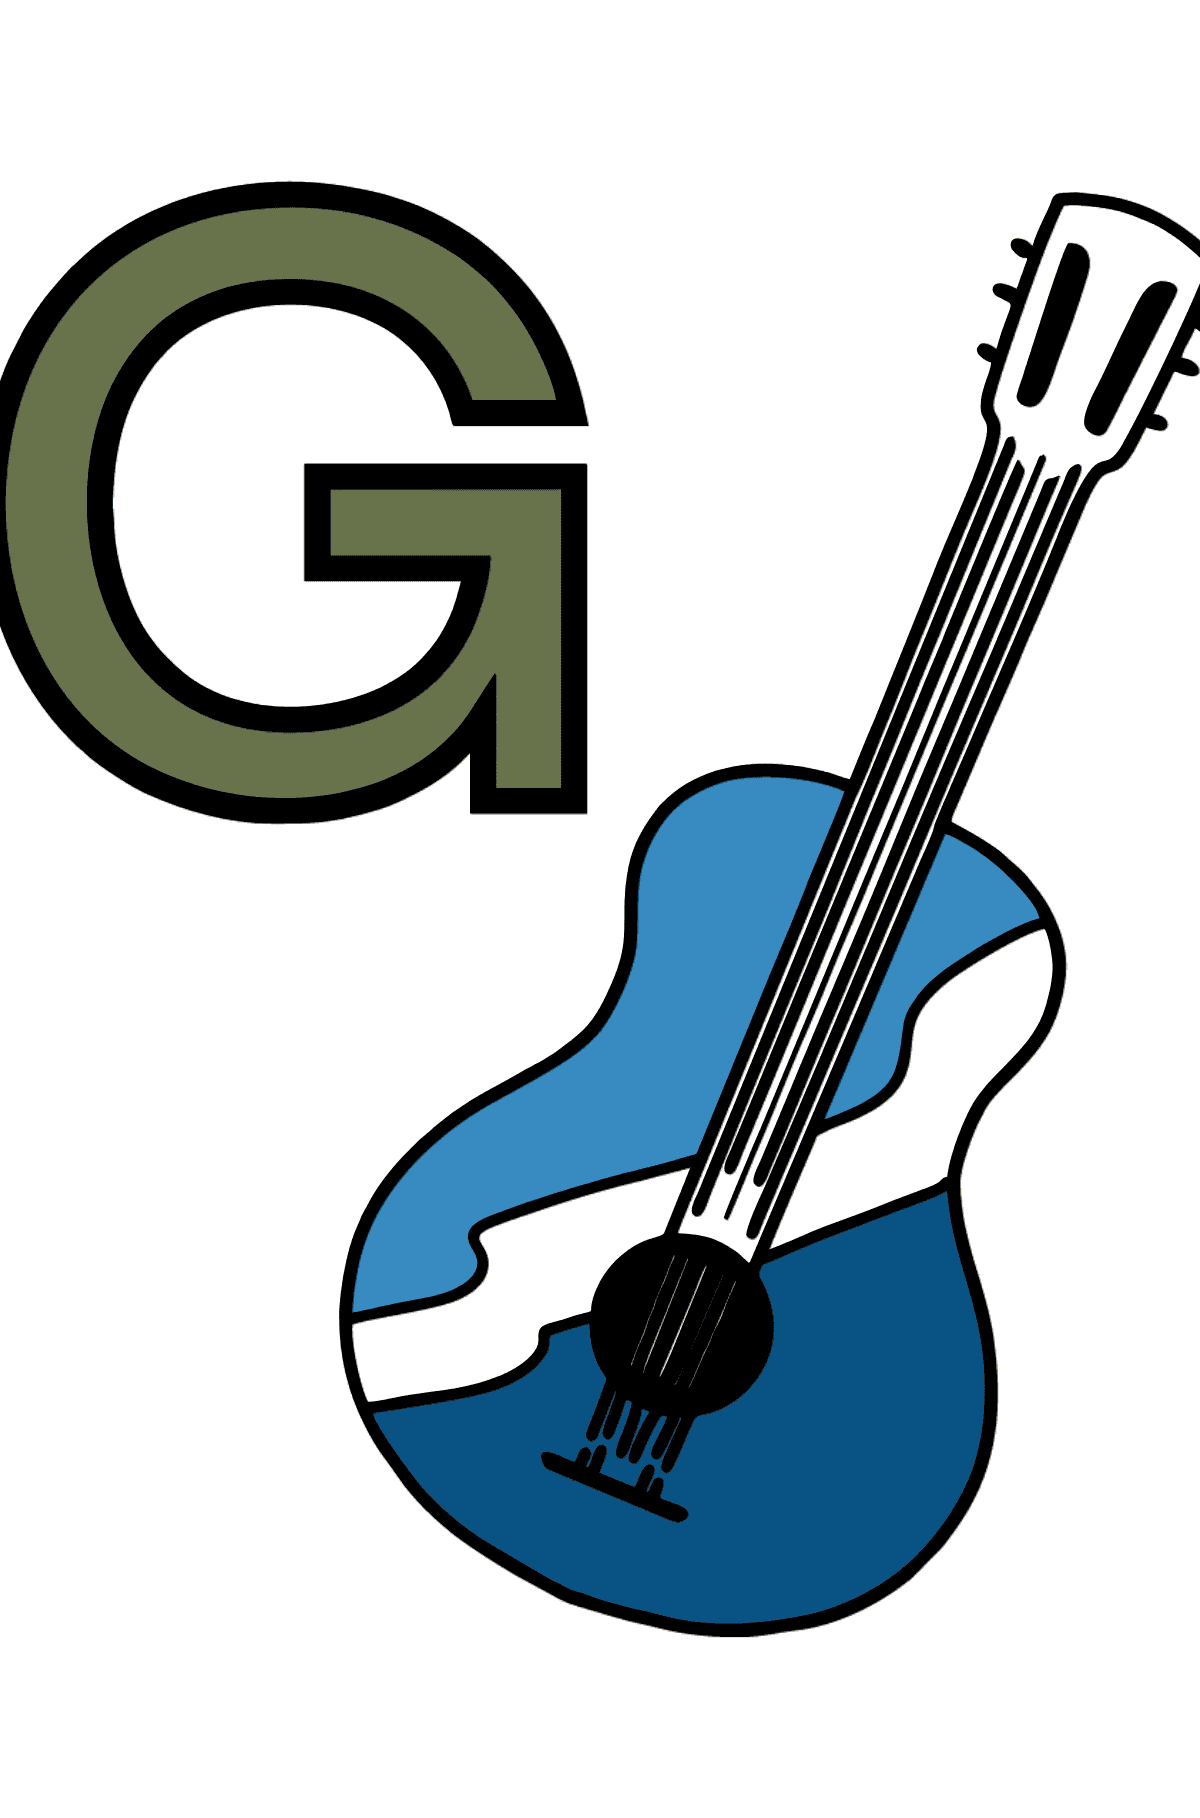 Spanish Letter G coloring pages - GUITARRA - Coloring Pages for Kids